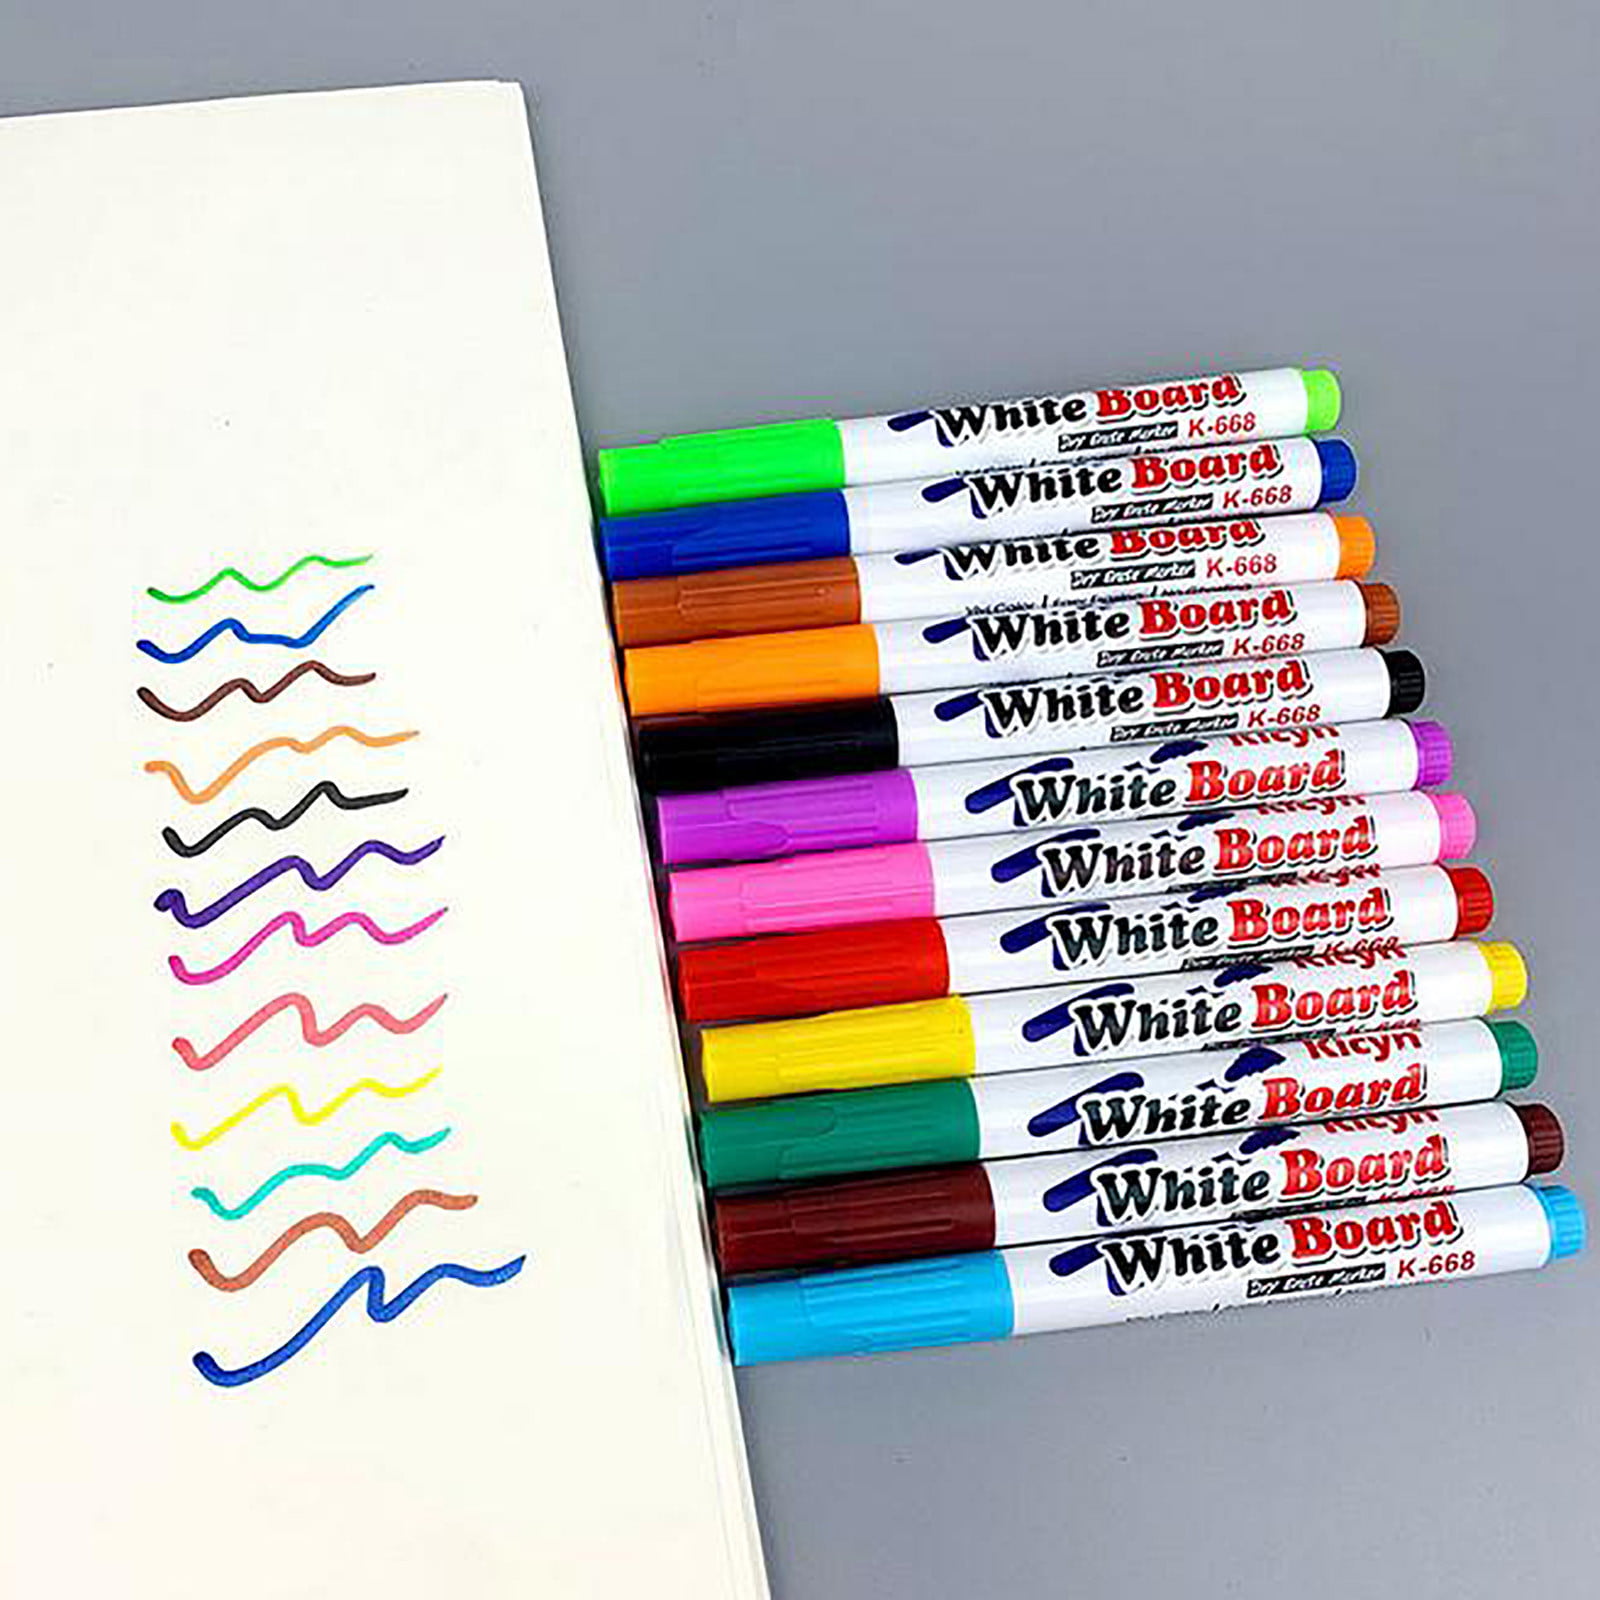 Erasable Water-Based Whiteboard Marker Pen Magical Water Painting Pen Water Doodle Pens Kids Drawing, Size: Type 2, Other